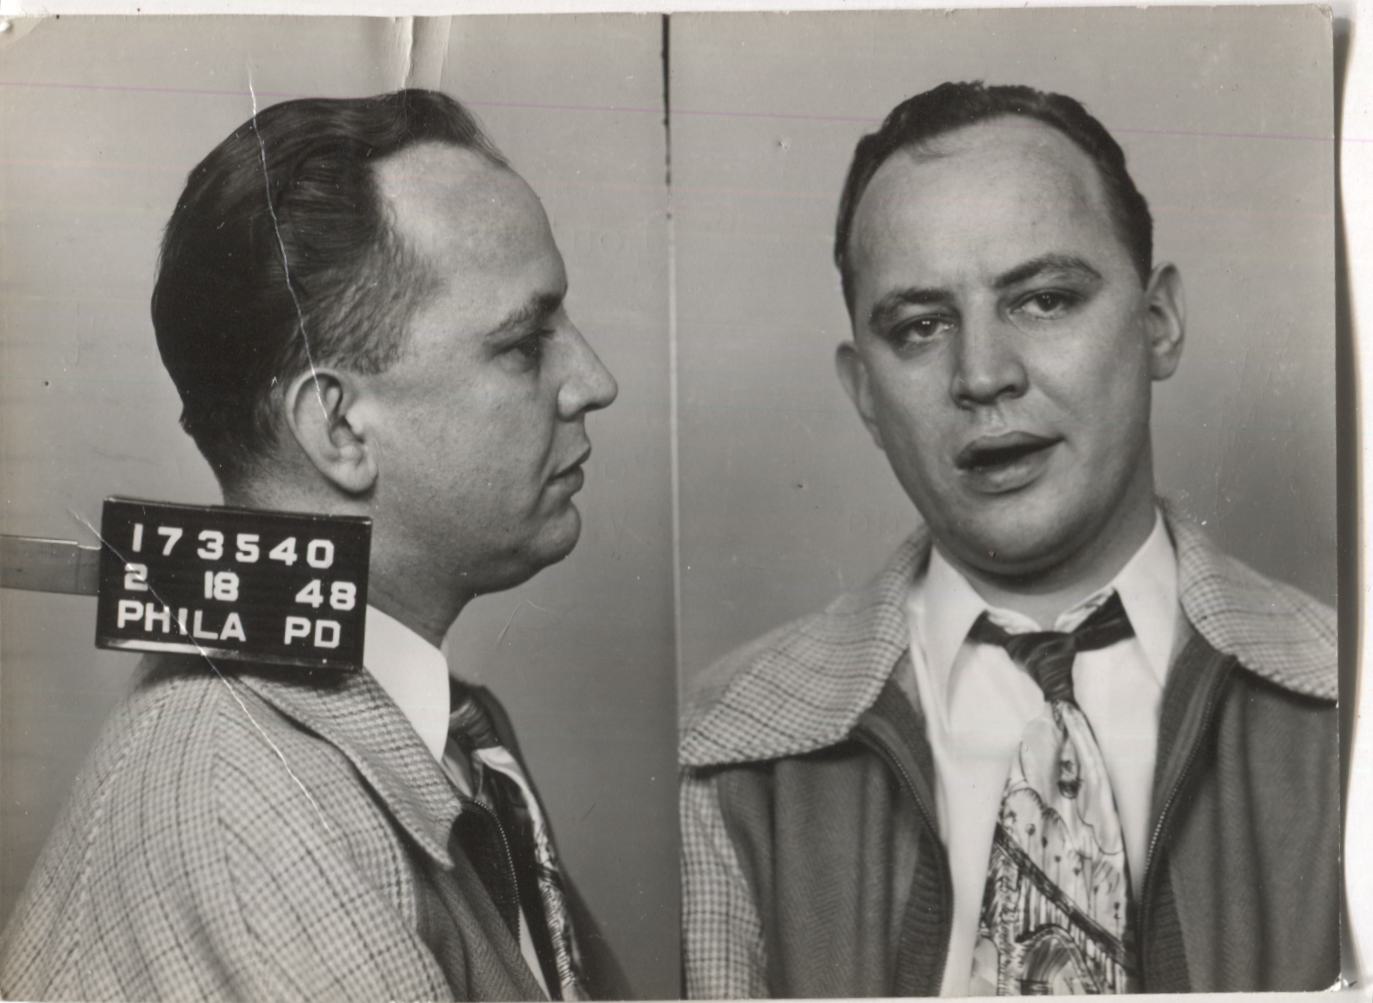 Louis Gibson Mugshot - Arrested on 2/18/1948 for Poolselling